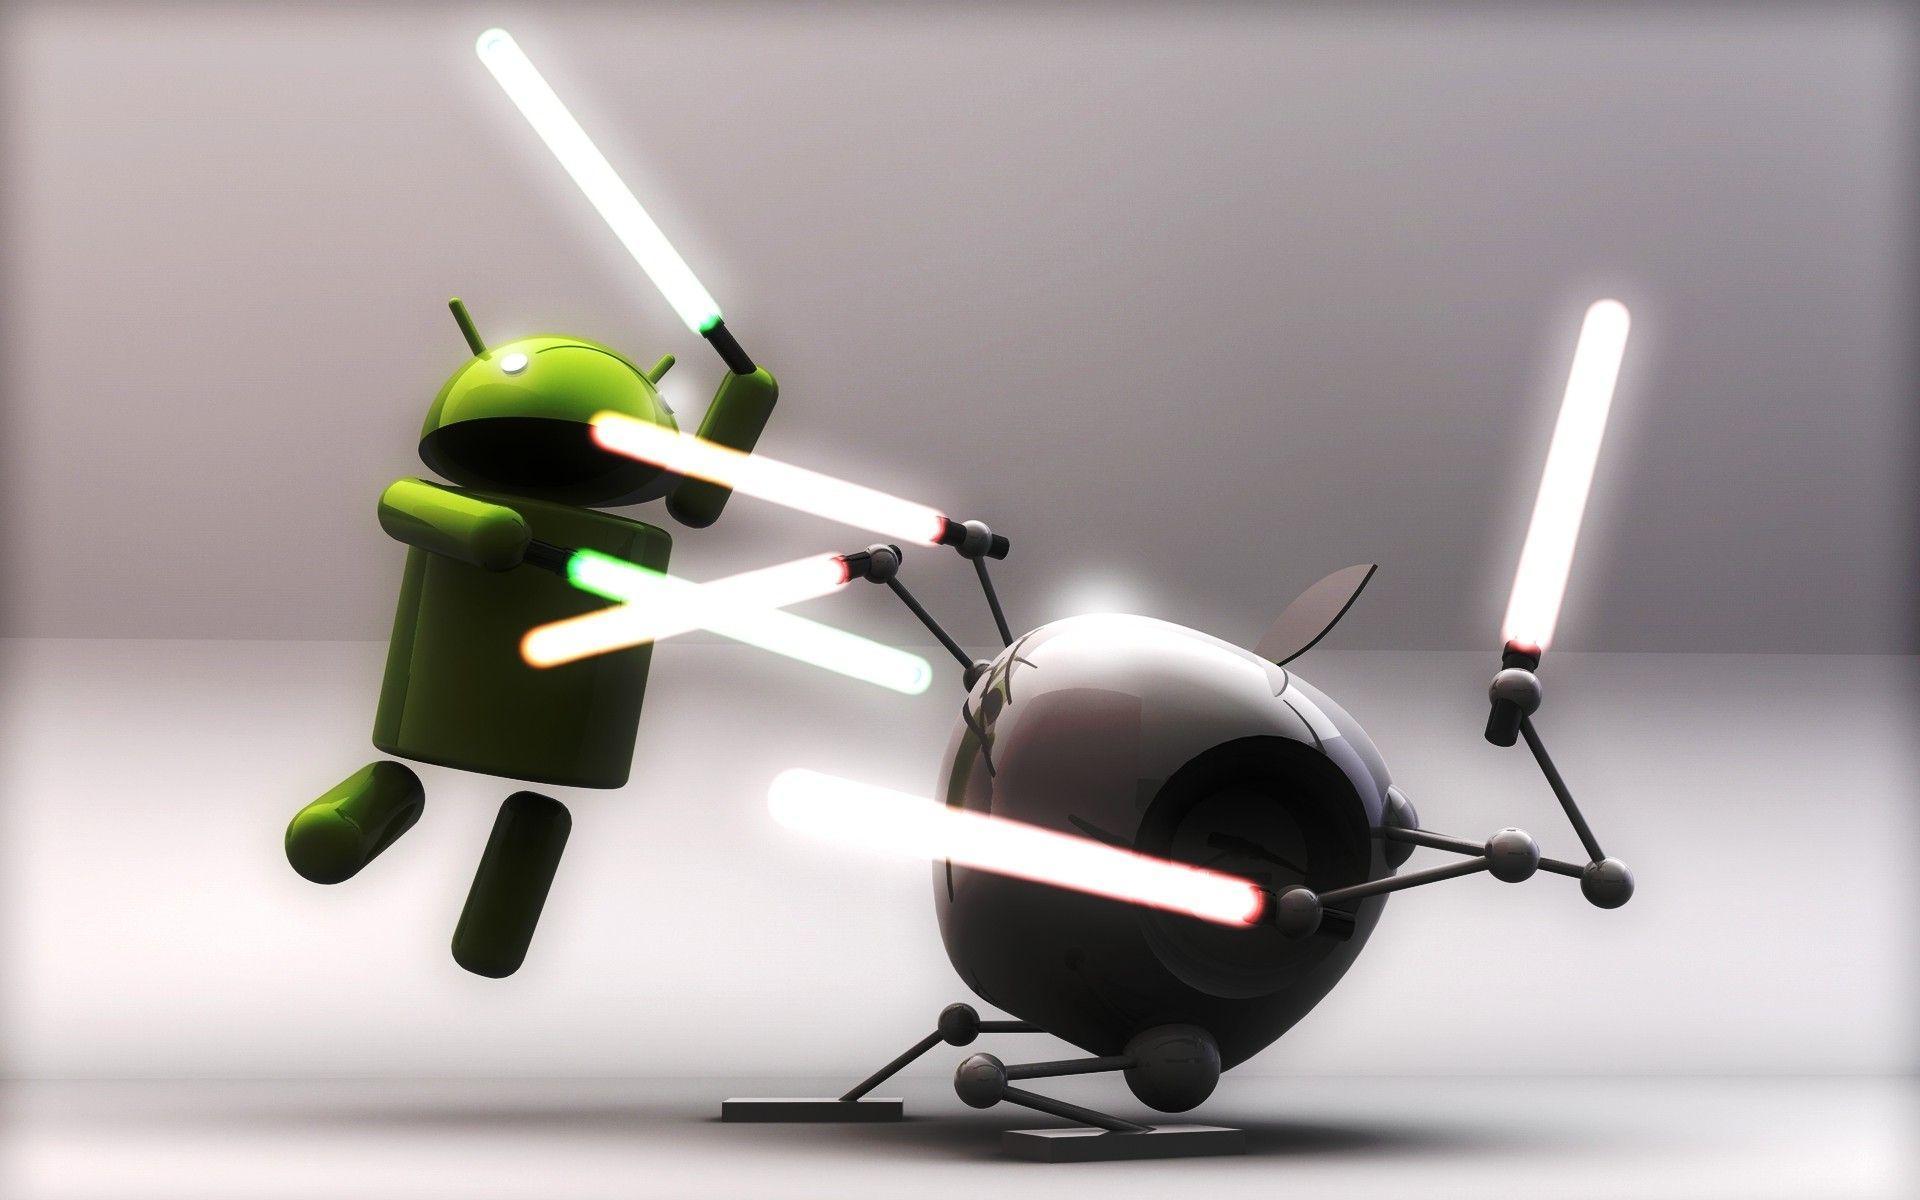 Cool Android Vs Apple Lightsaber Wallpaper. TanukinoSippo